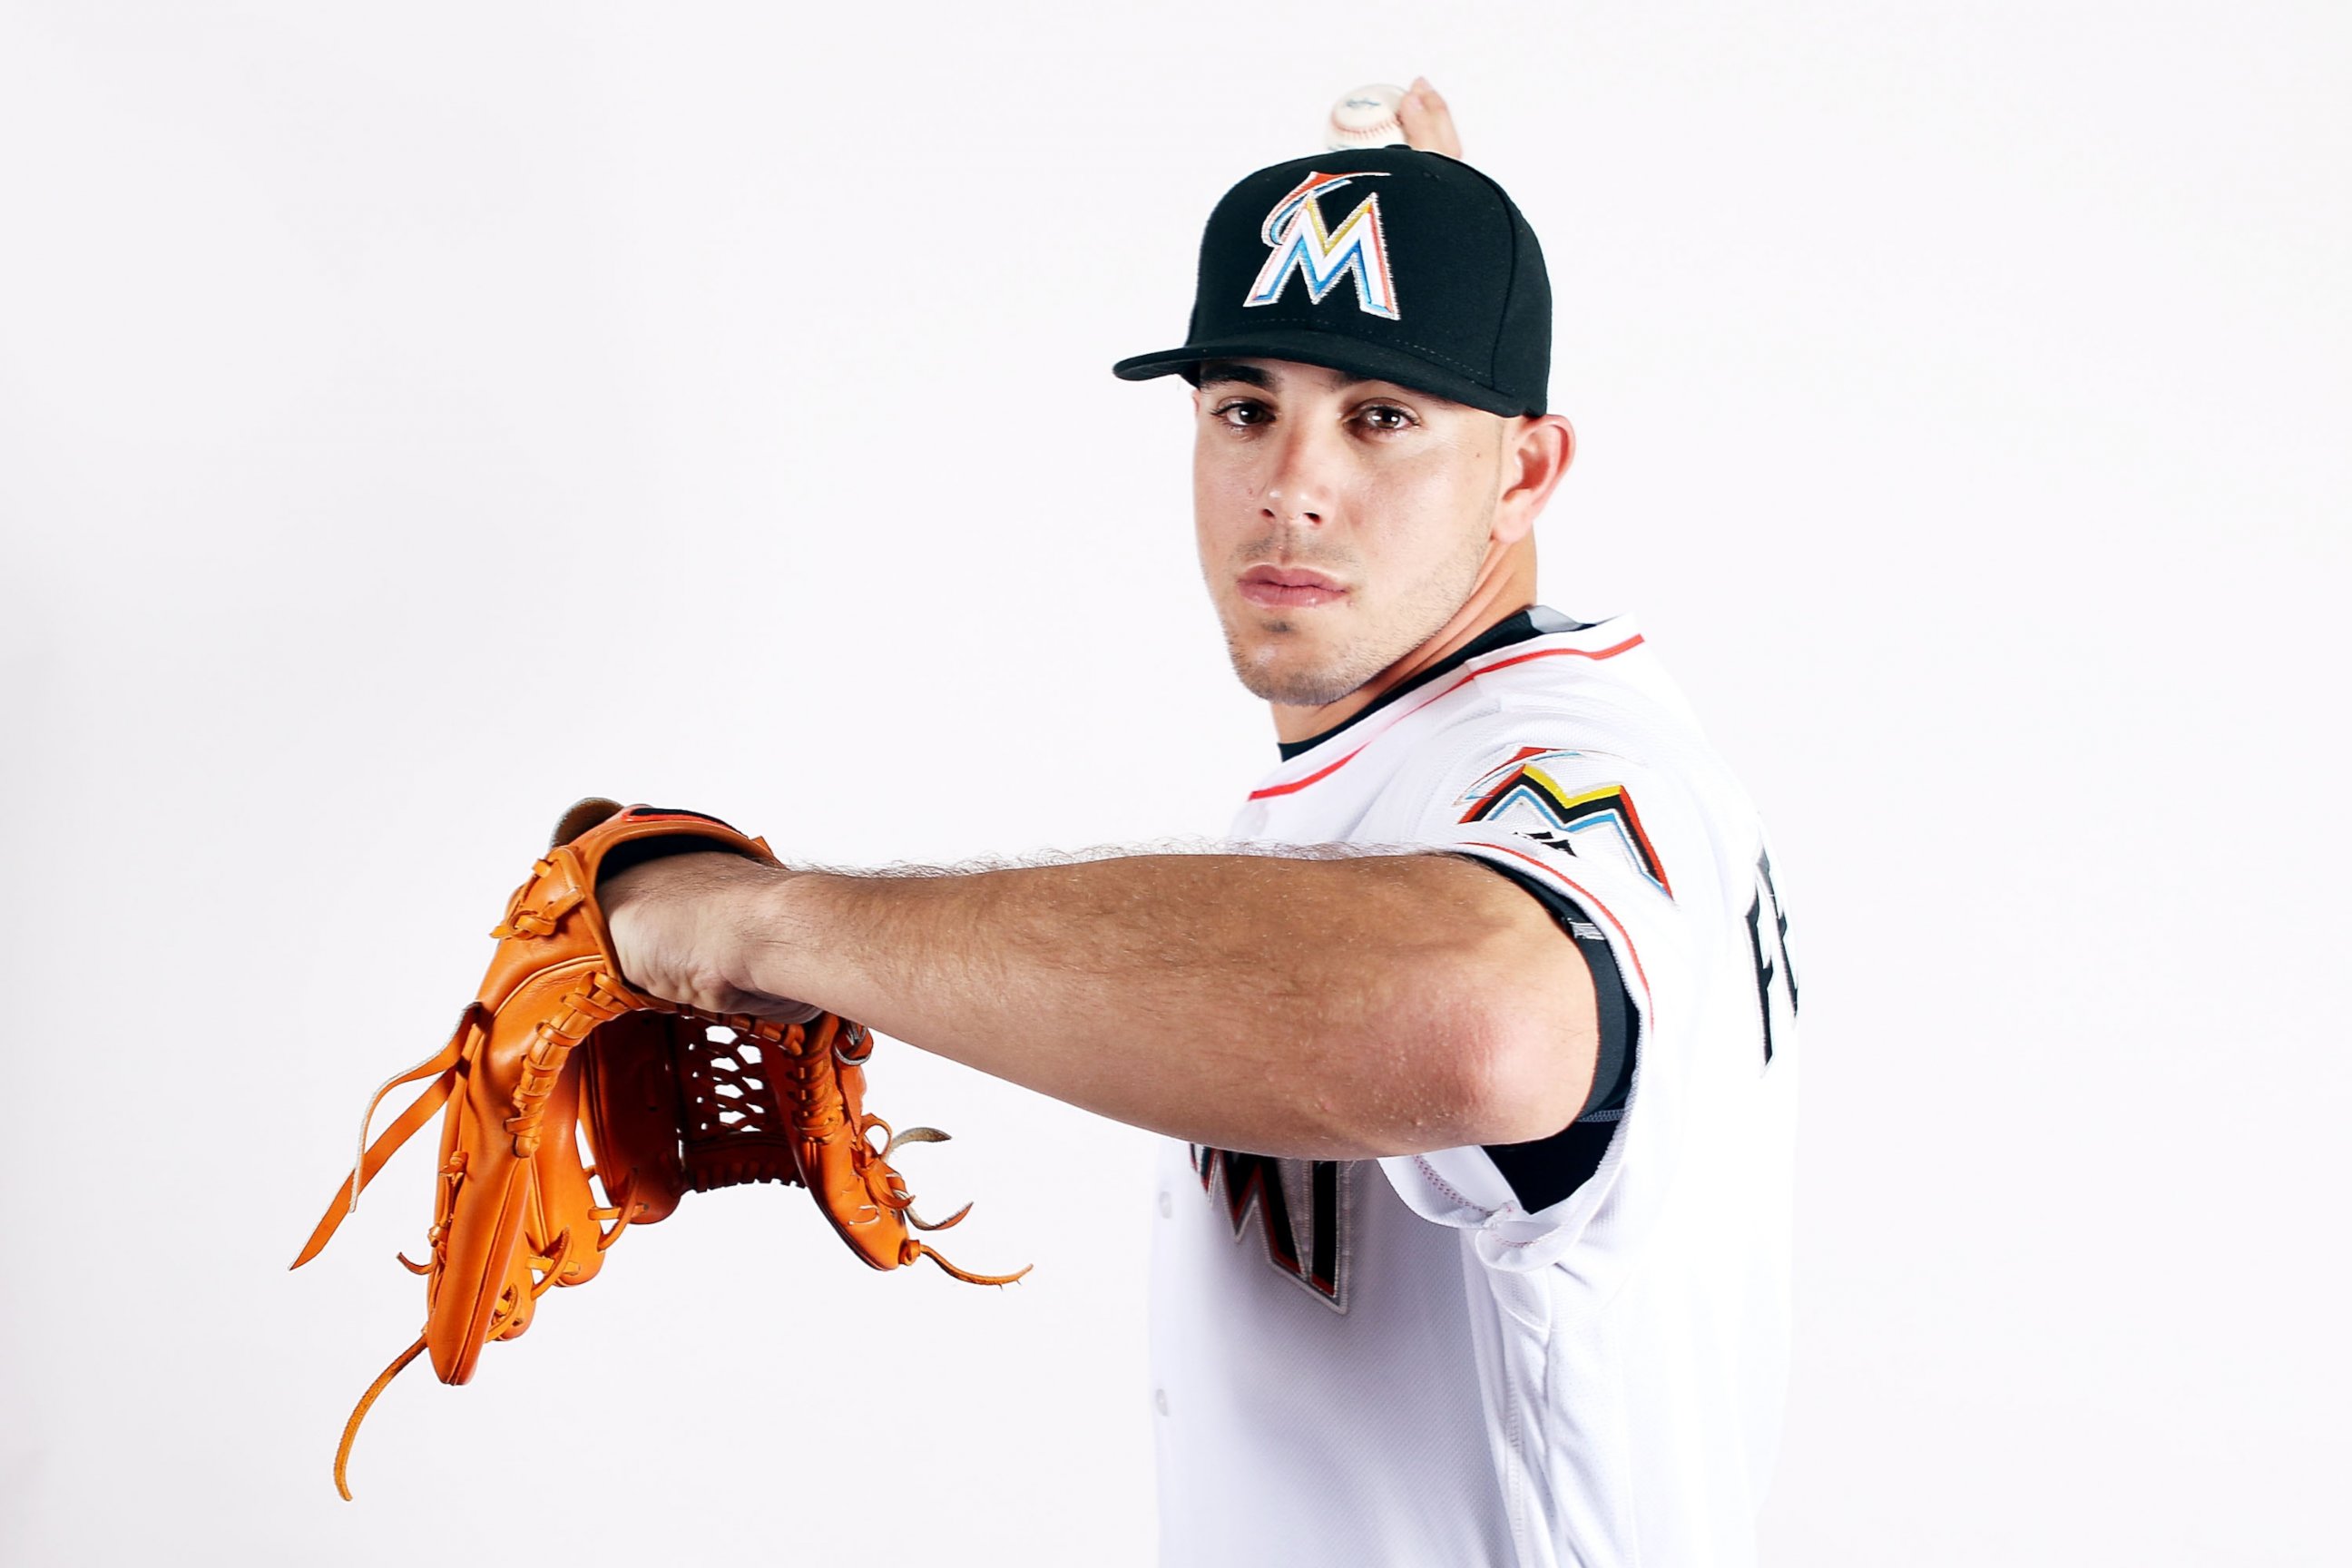 PHOTO: Pitcher Jose Fernandez of the Miami Marlins poses for photos on media day at Roger Dean Stadium on Feb. 24, 2016 in Jupiter, Florida. 